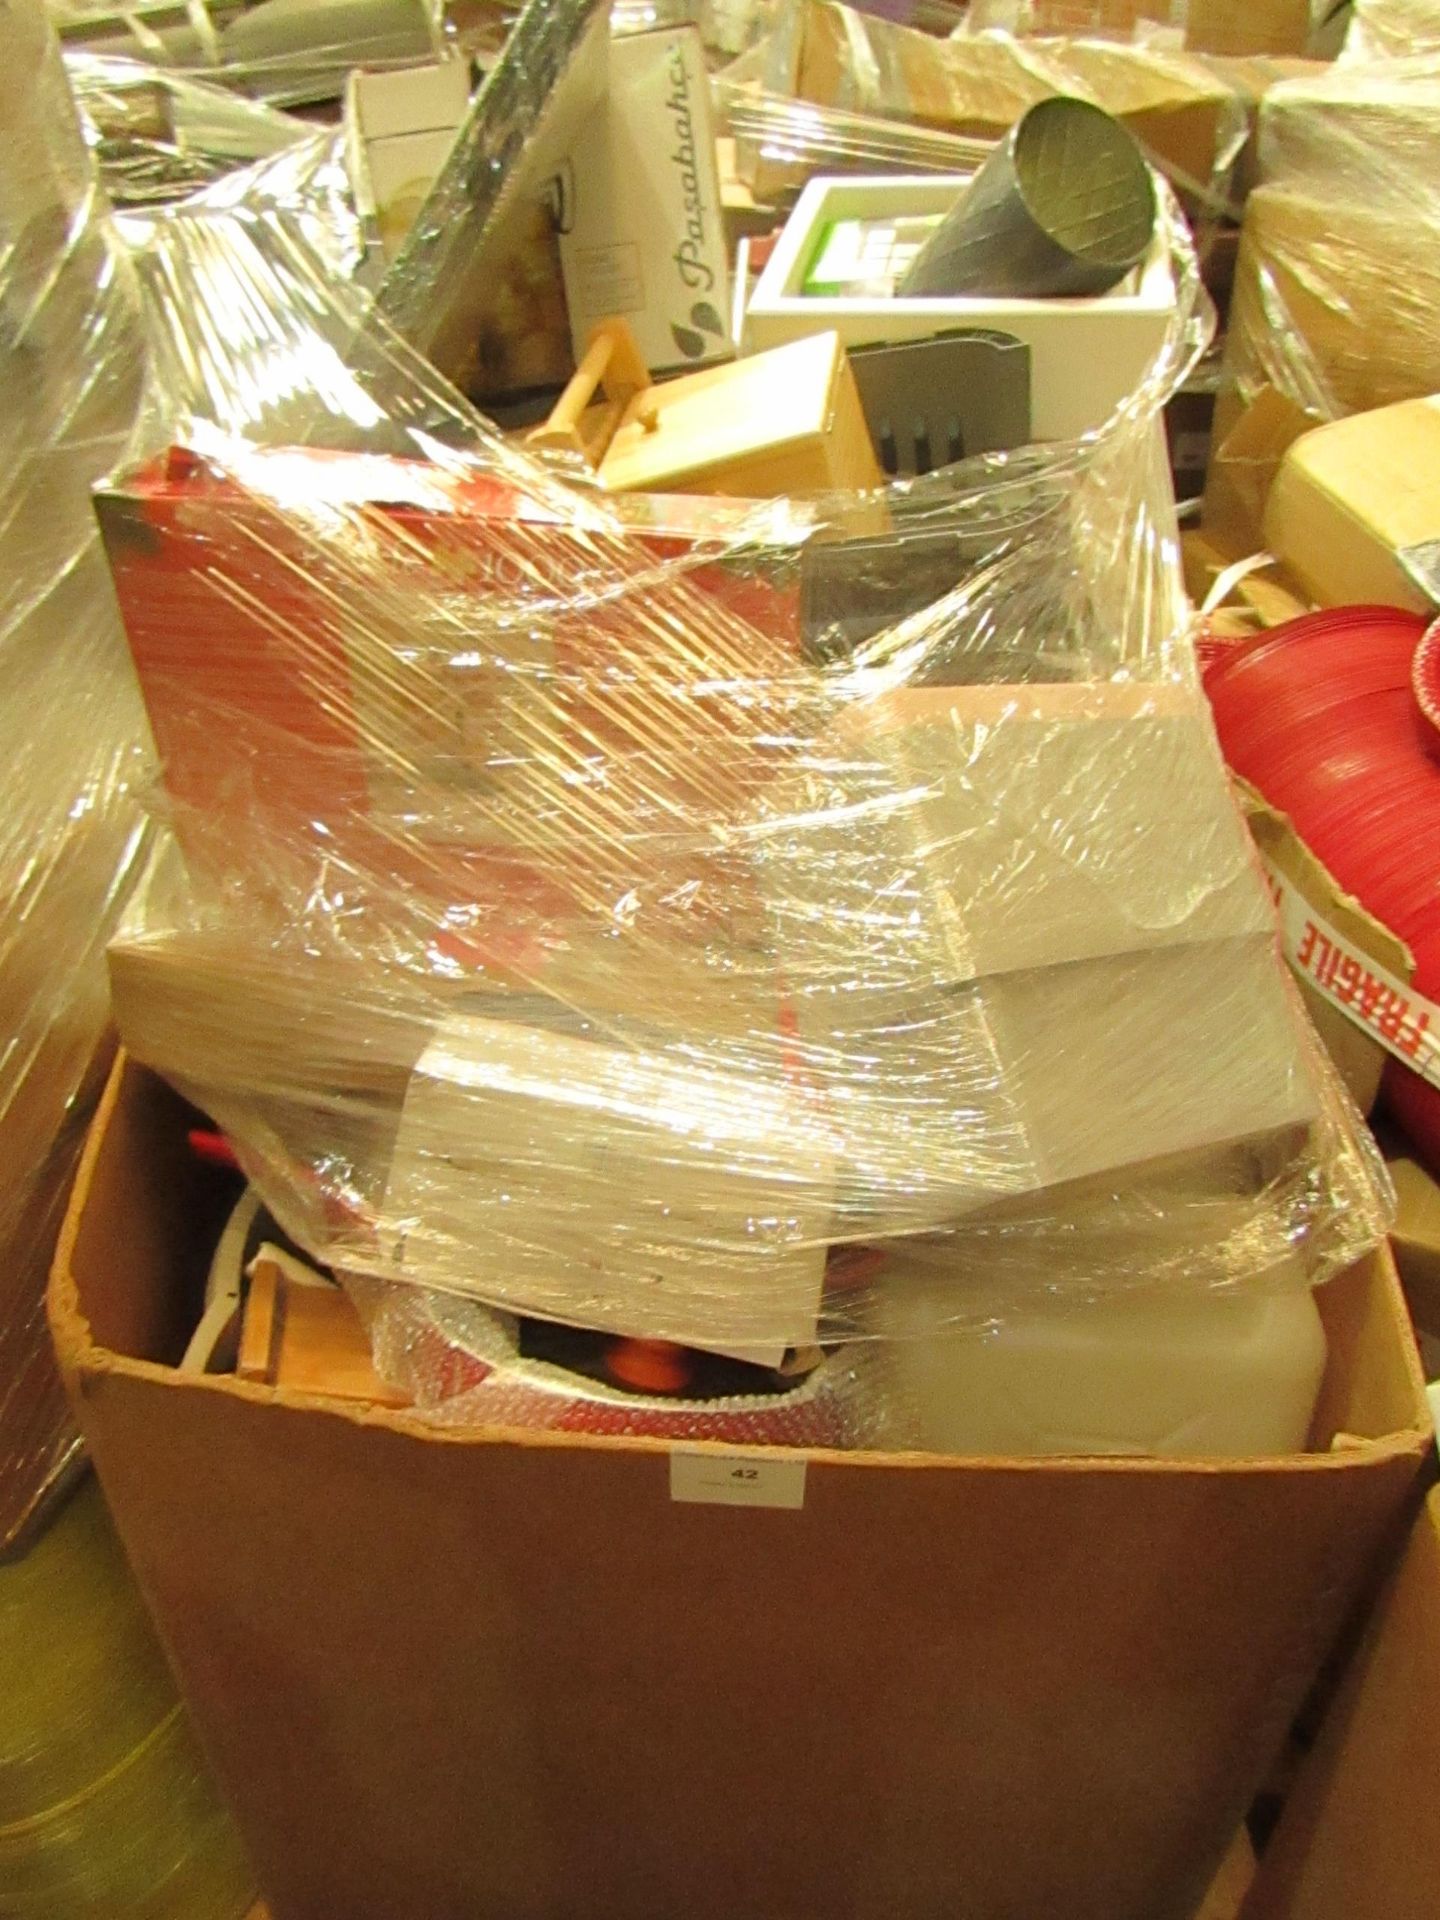 A pallet of Mixed raw customer returns and sample stock, the pallet is unmanifested and typically